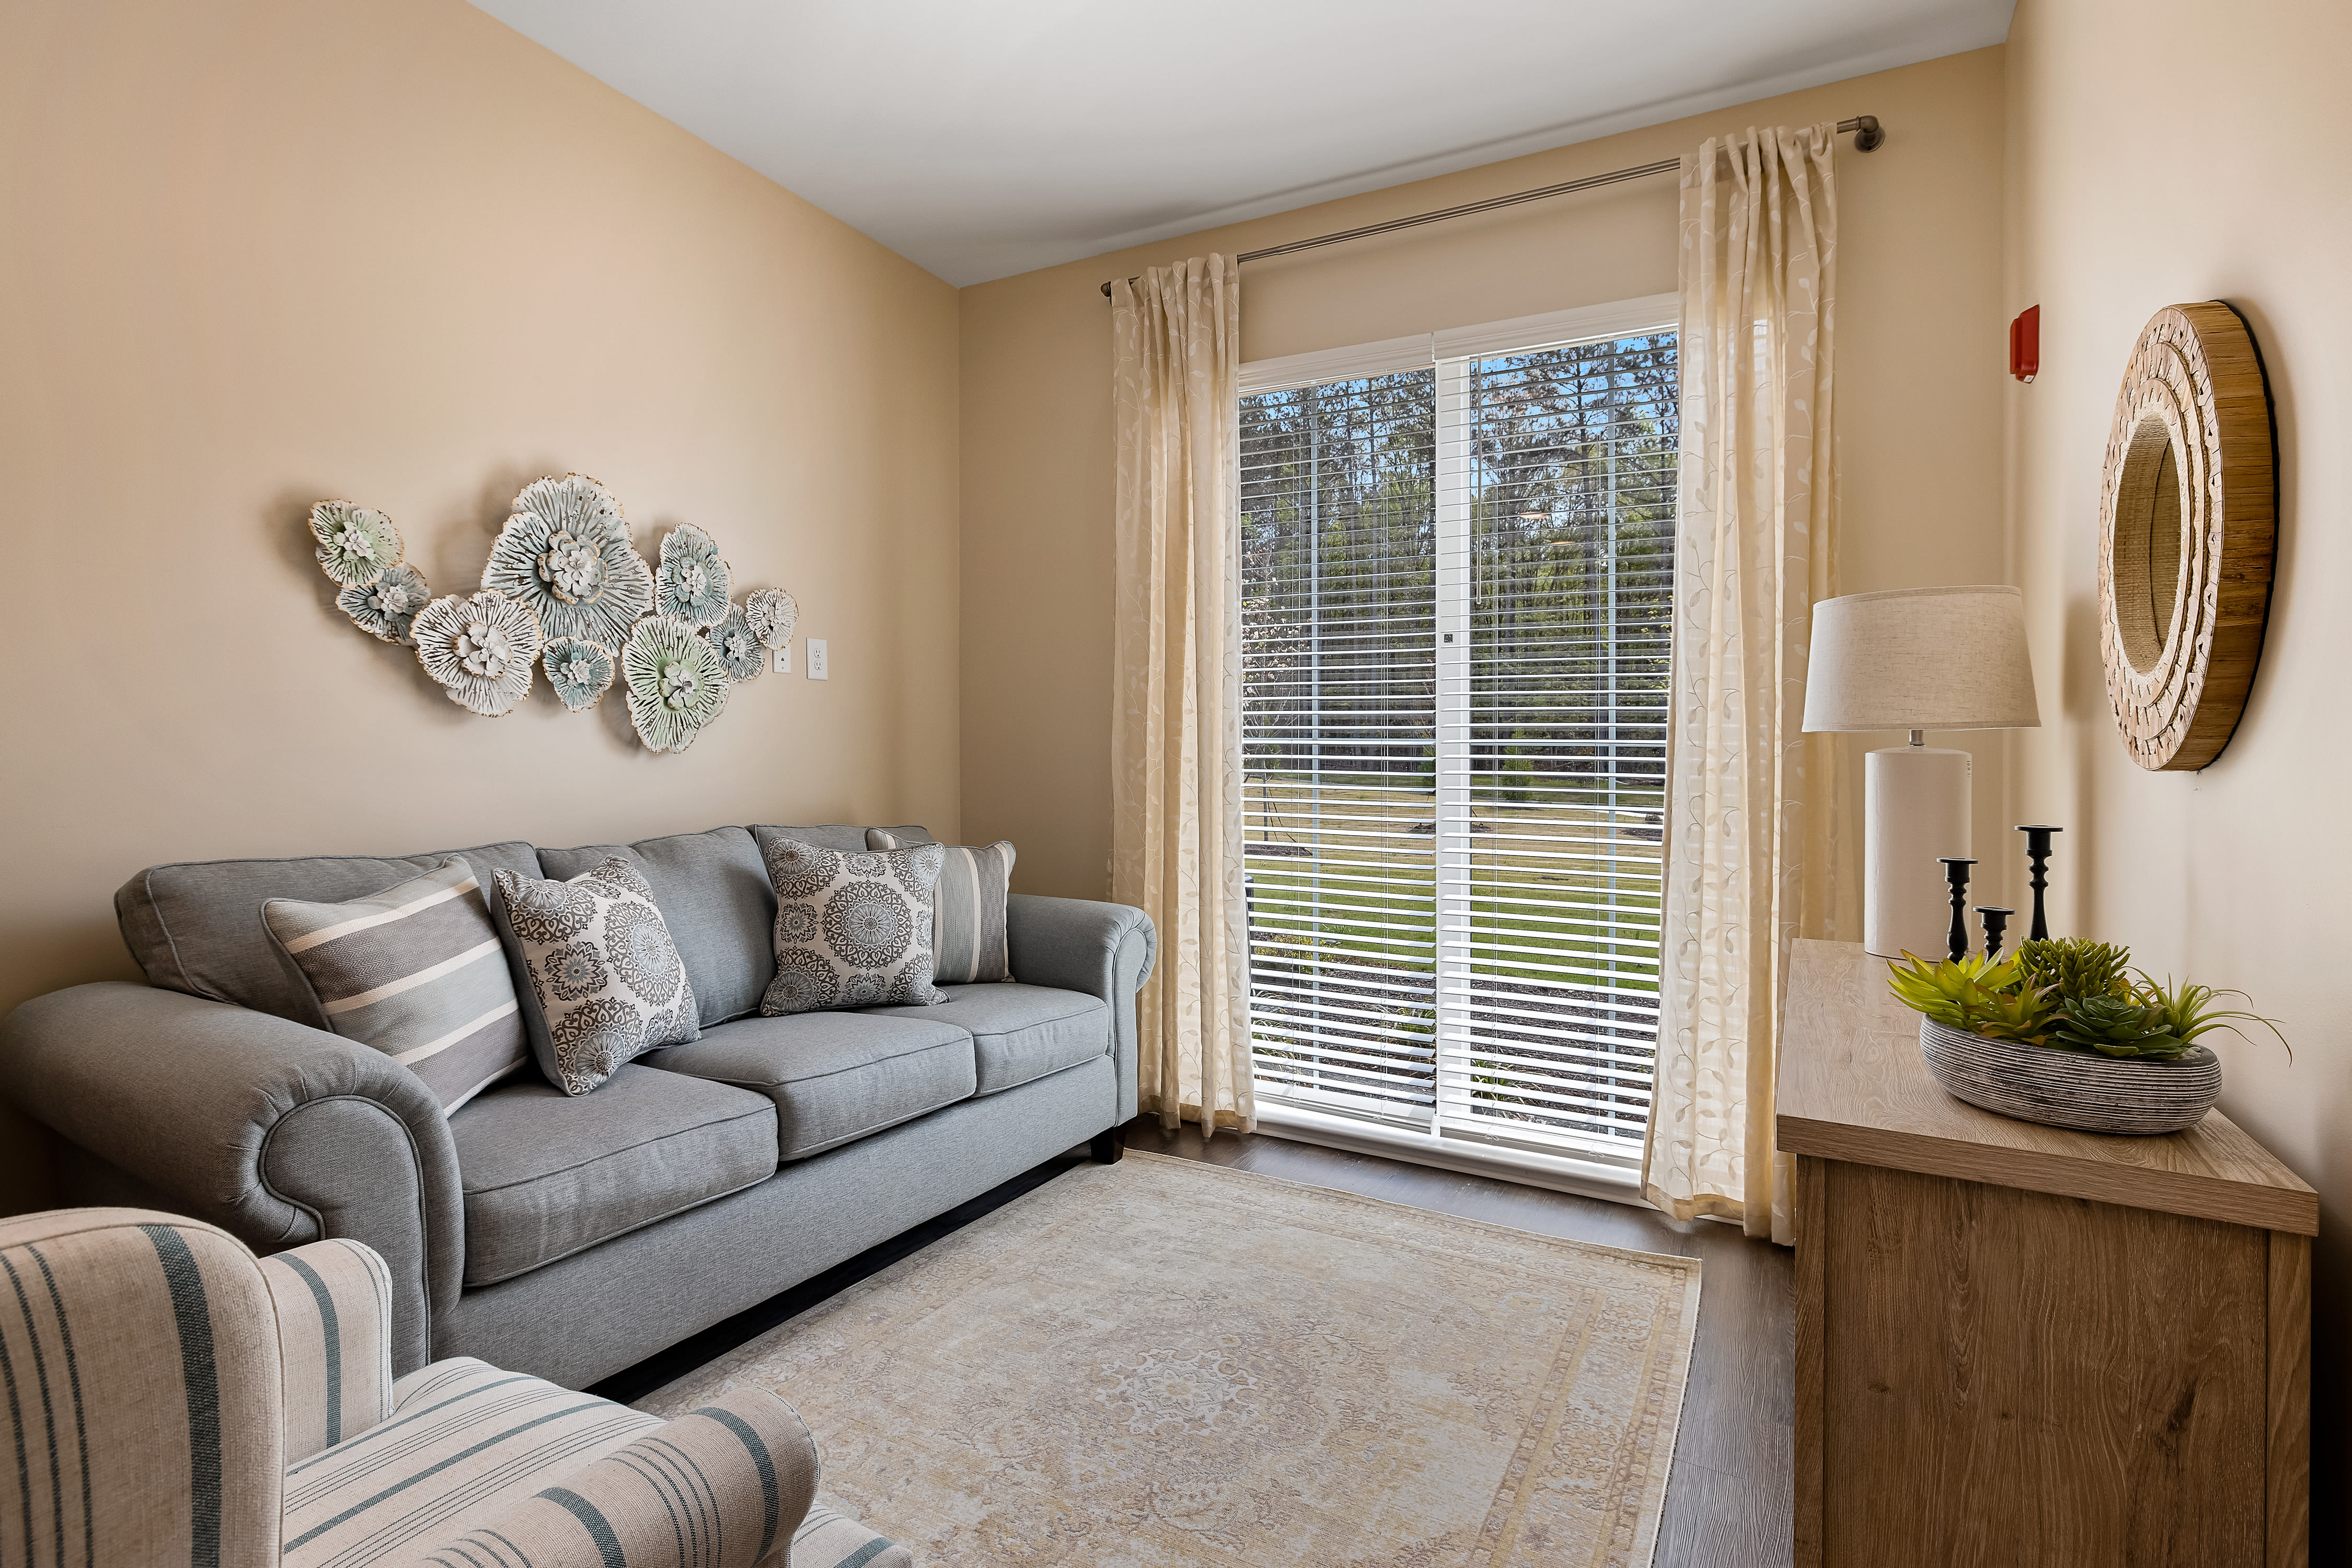 Warm furnished bedroom with a scenic view at The Claiborne at Newnan Lakes in Newnan, GA